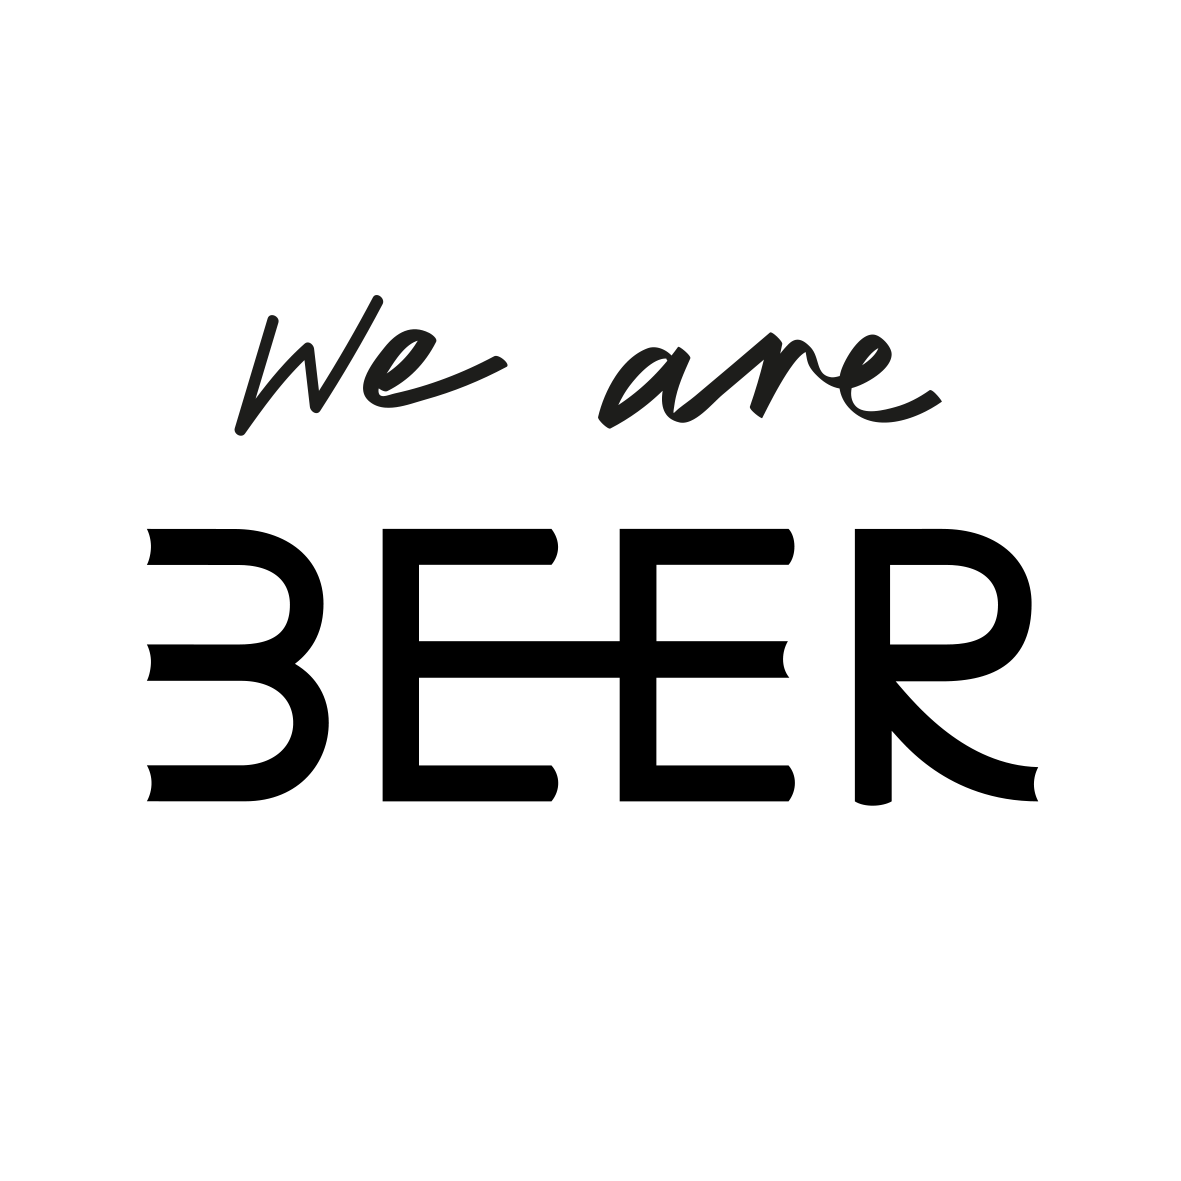 We Are Beer Logo